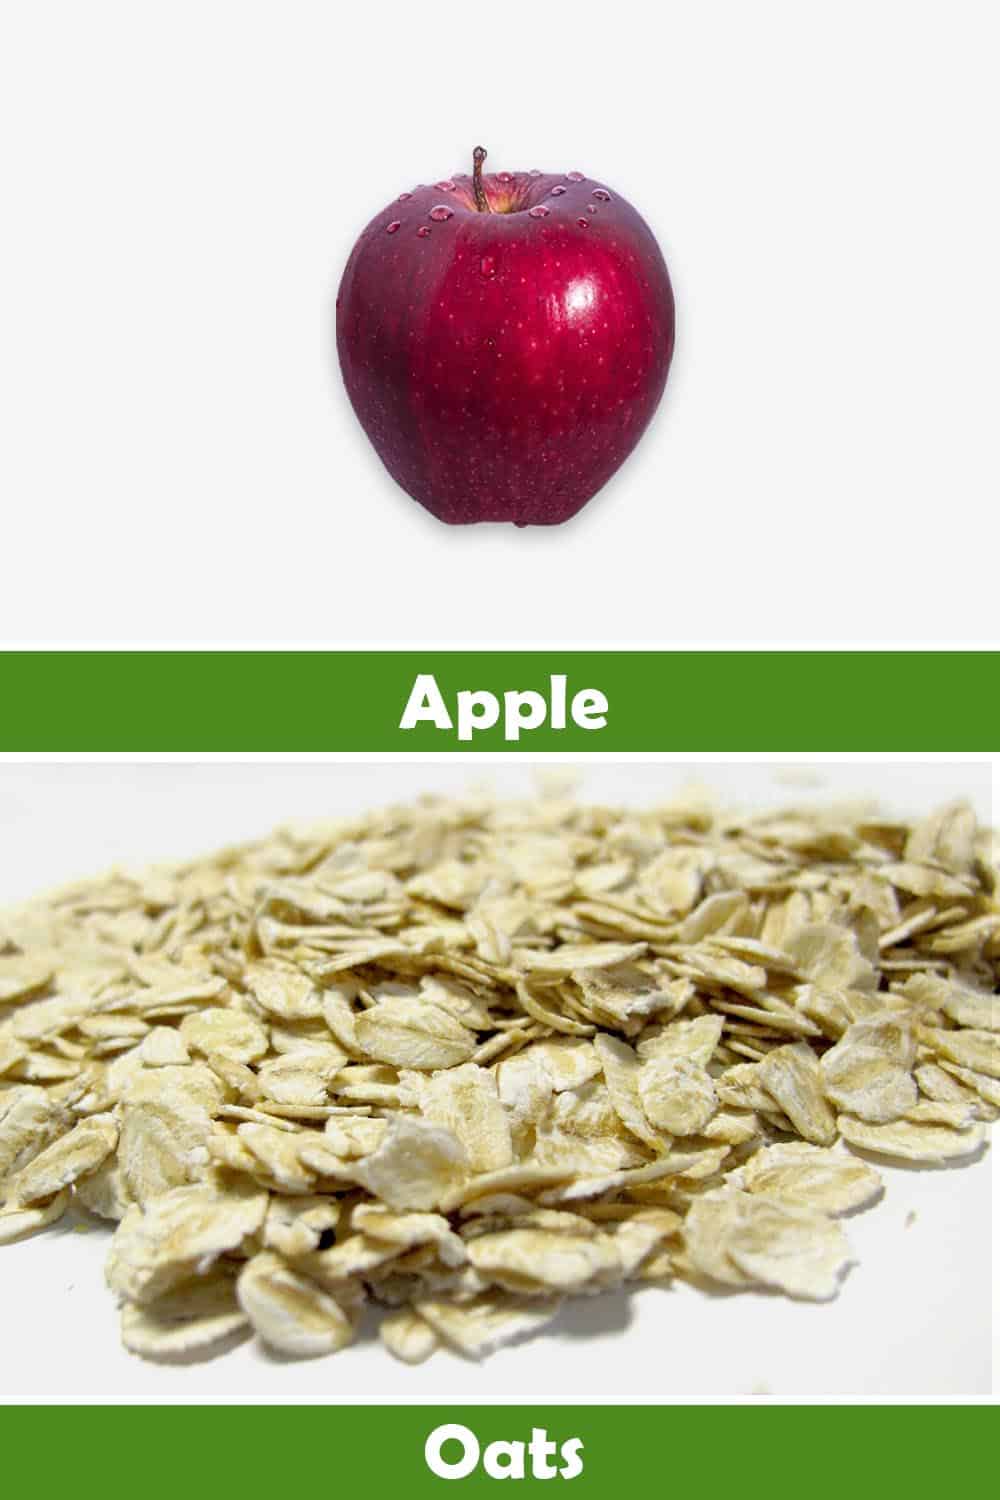 APPLE AND OATS